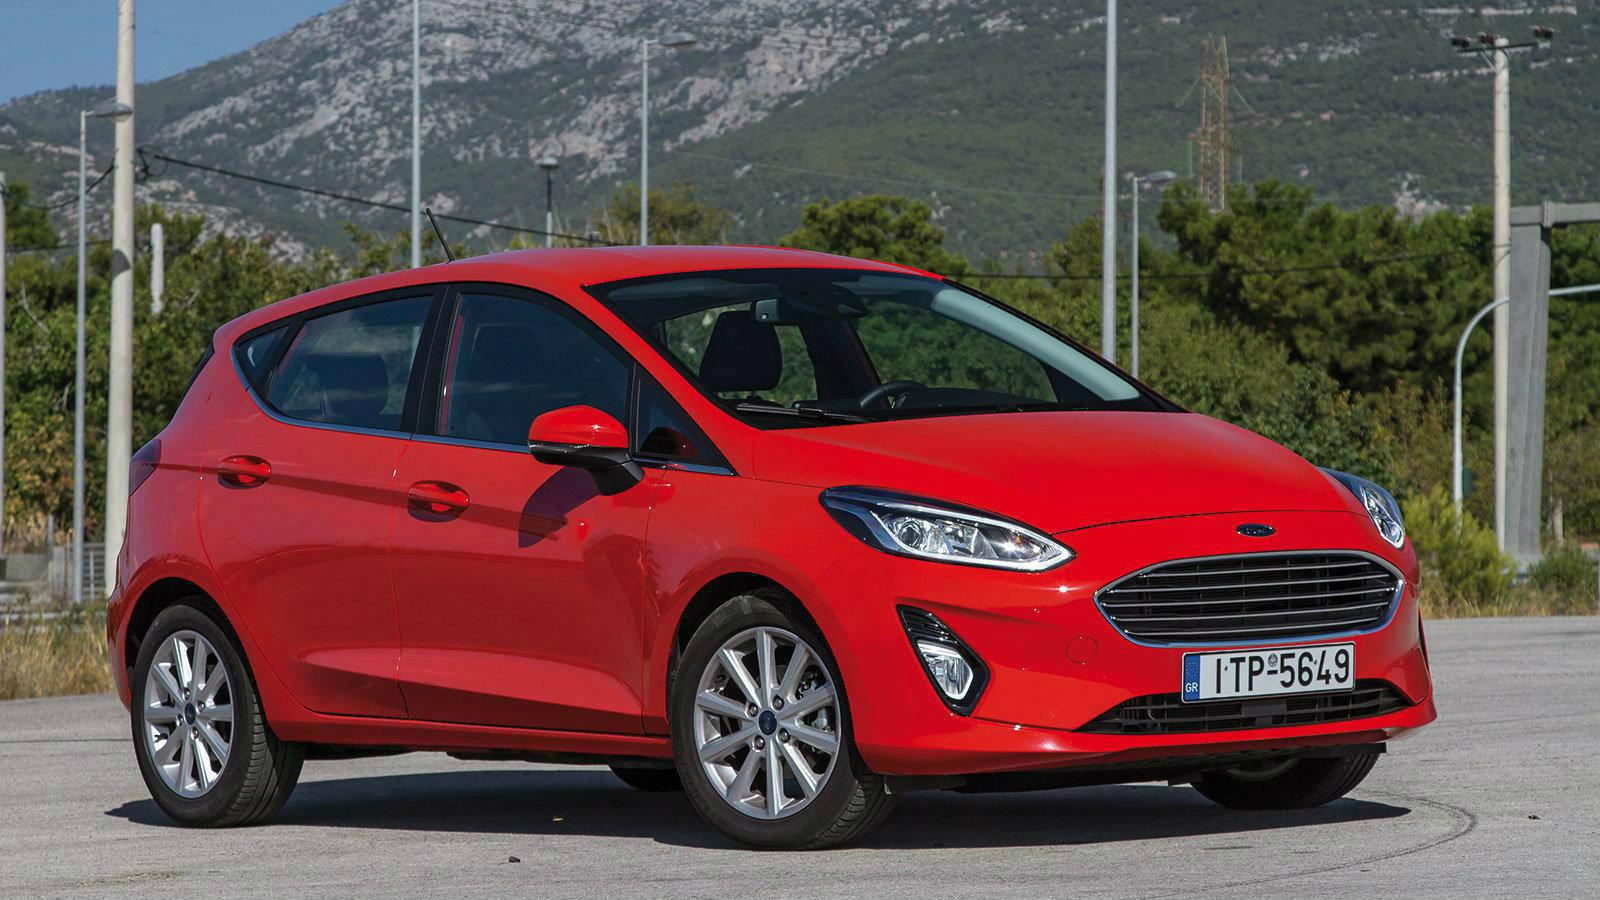 3. Ford Fiesta EcoBoost 125 PS